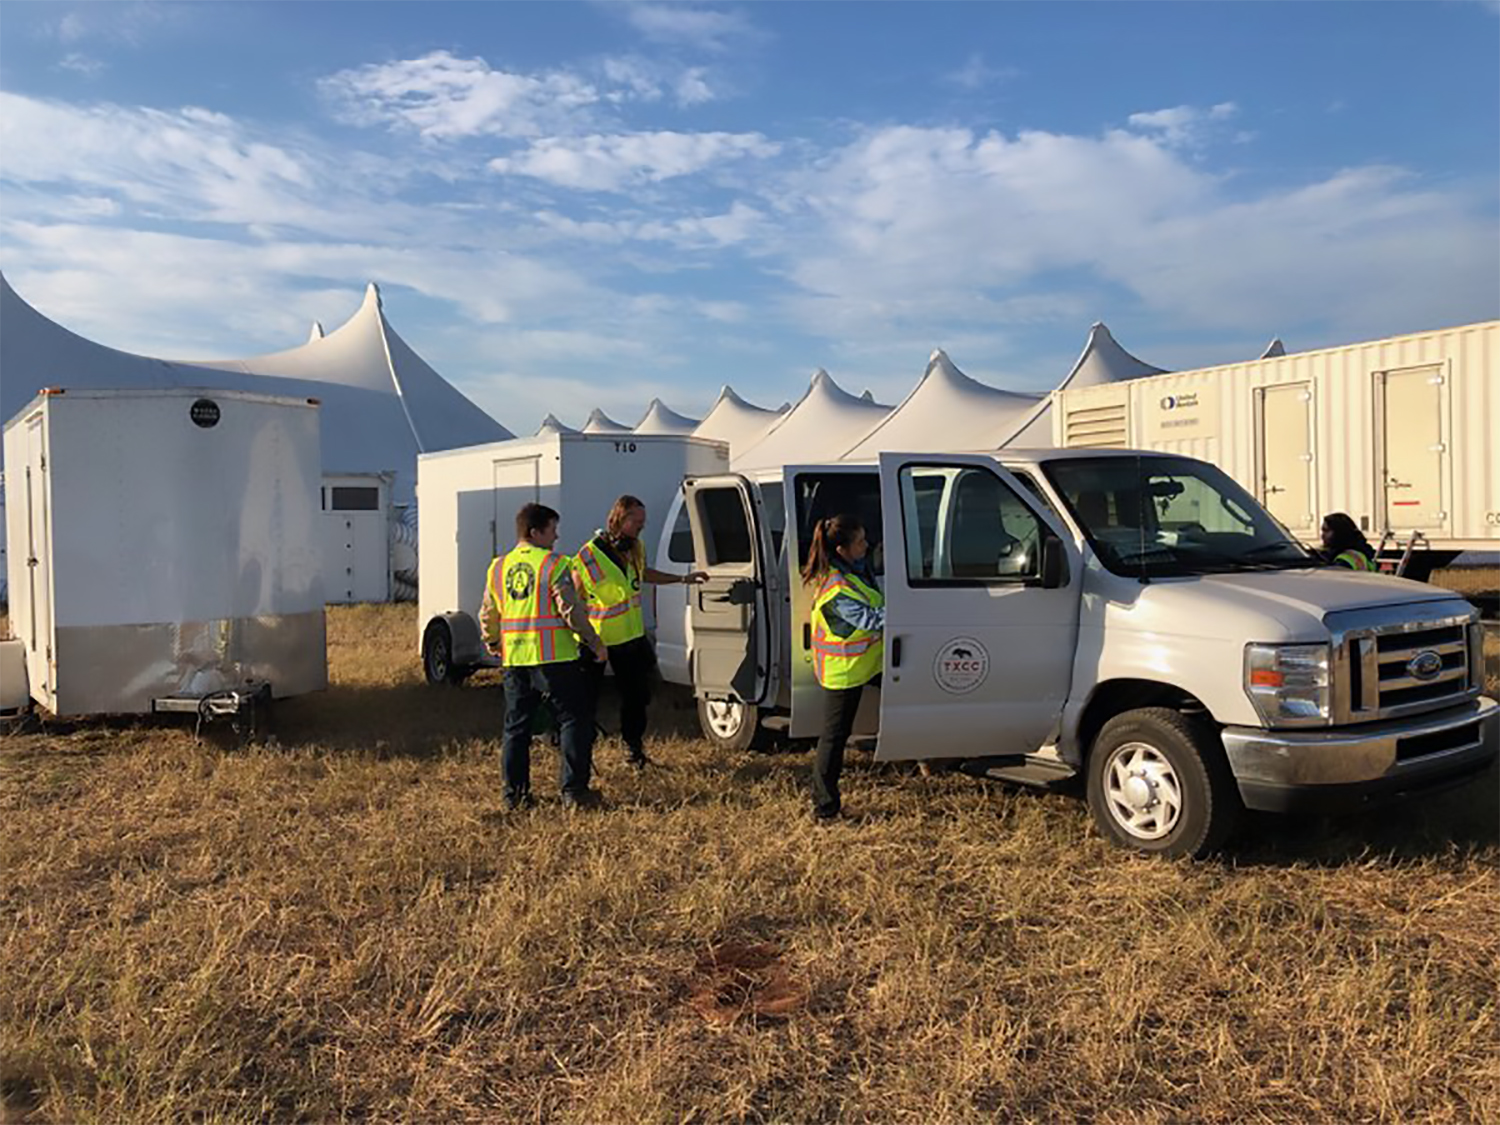 Disaster response crew preparing to help clean up after Hurricane Michael